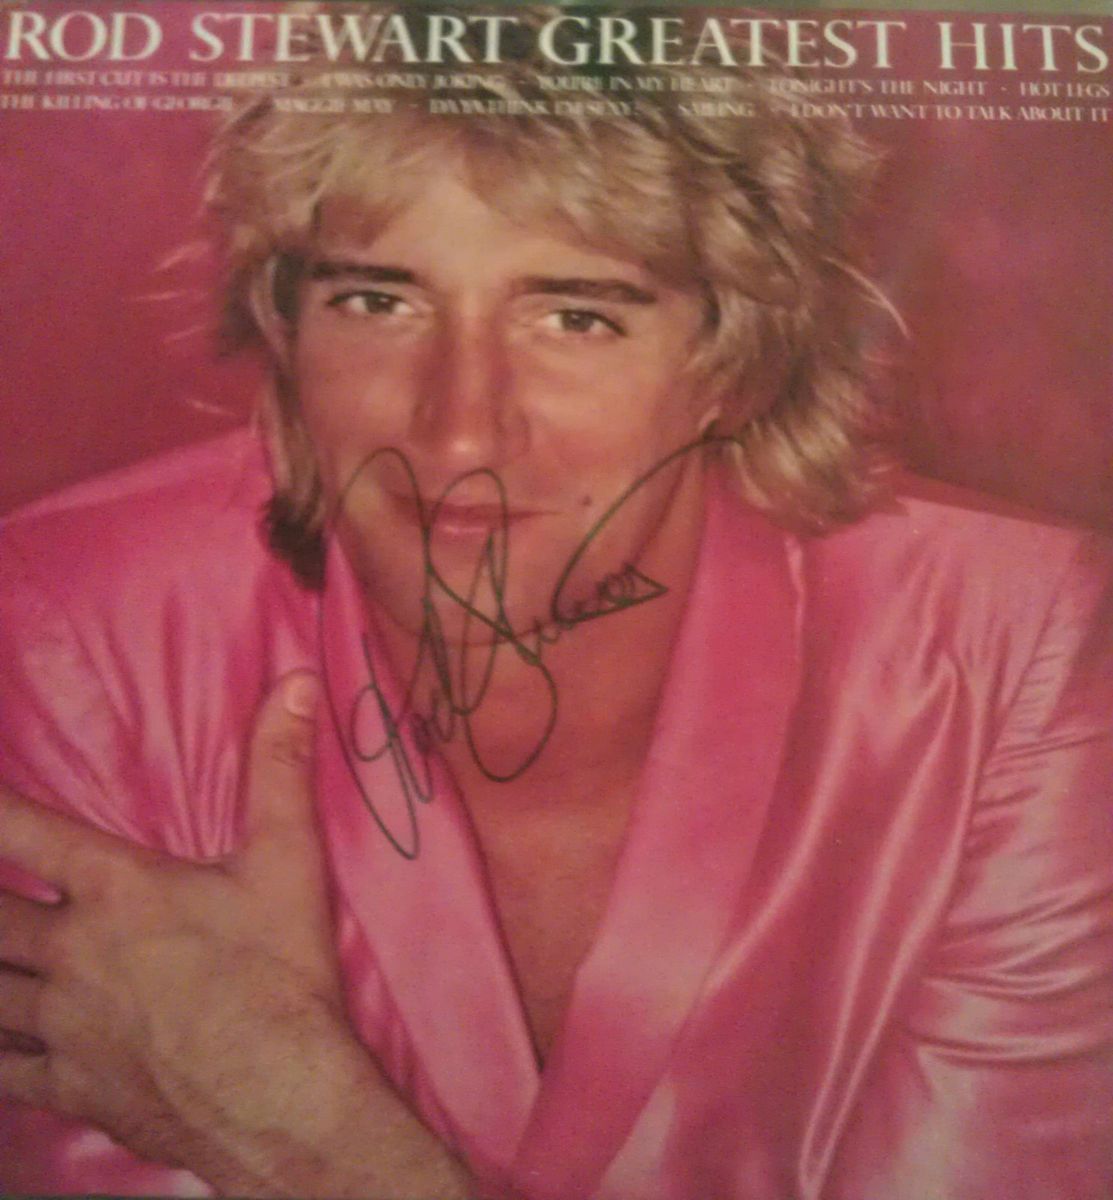  Rod Stewart Signed Album LP Cover Greatest Hits